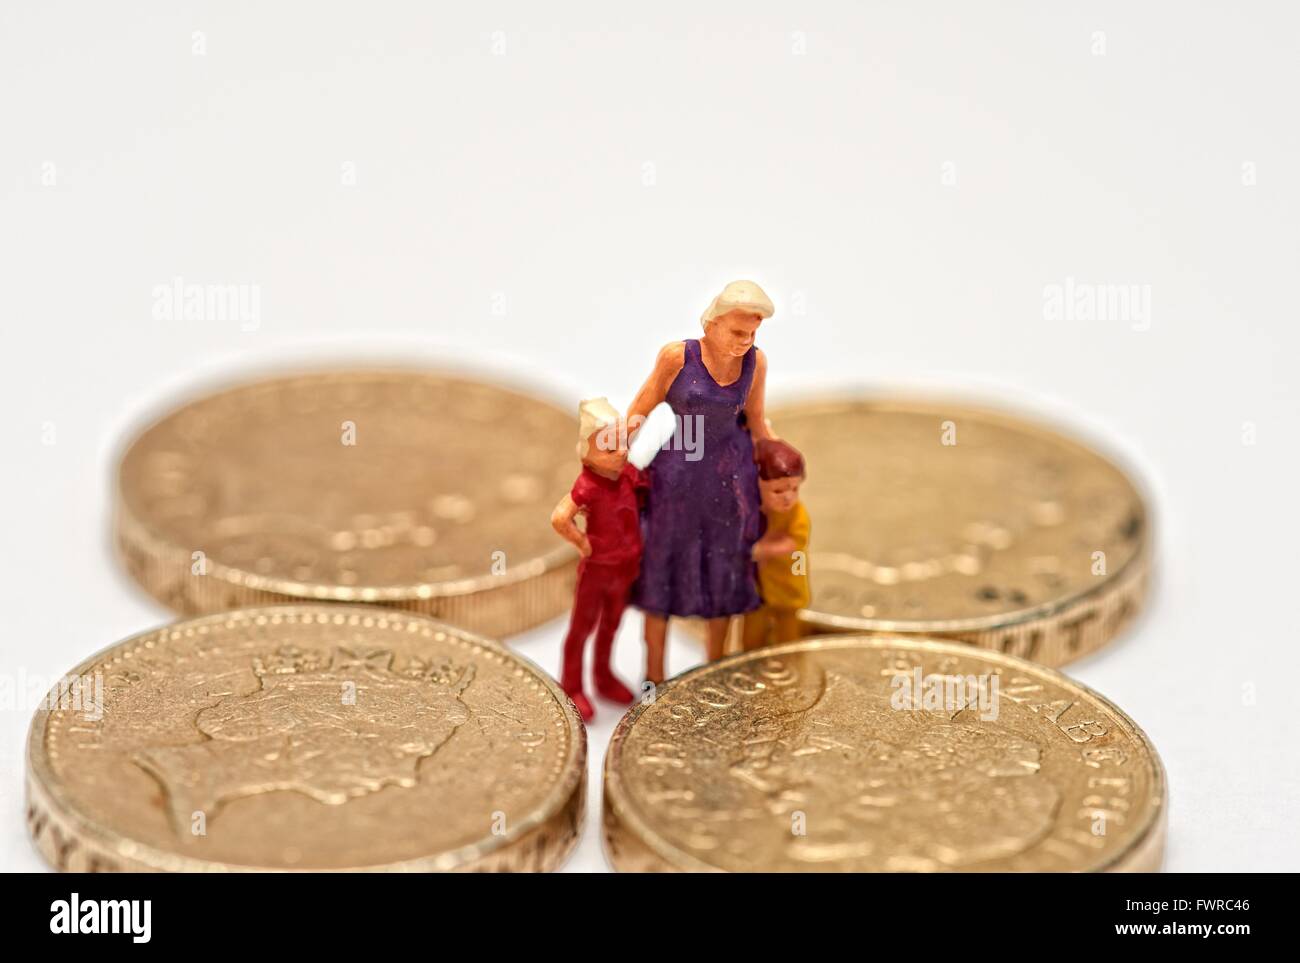 A miniature figurine woman with 2 children standing in between one pound coins Stock Photo